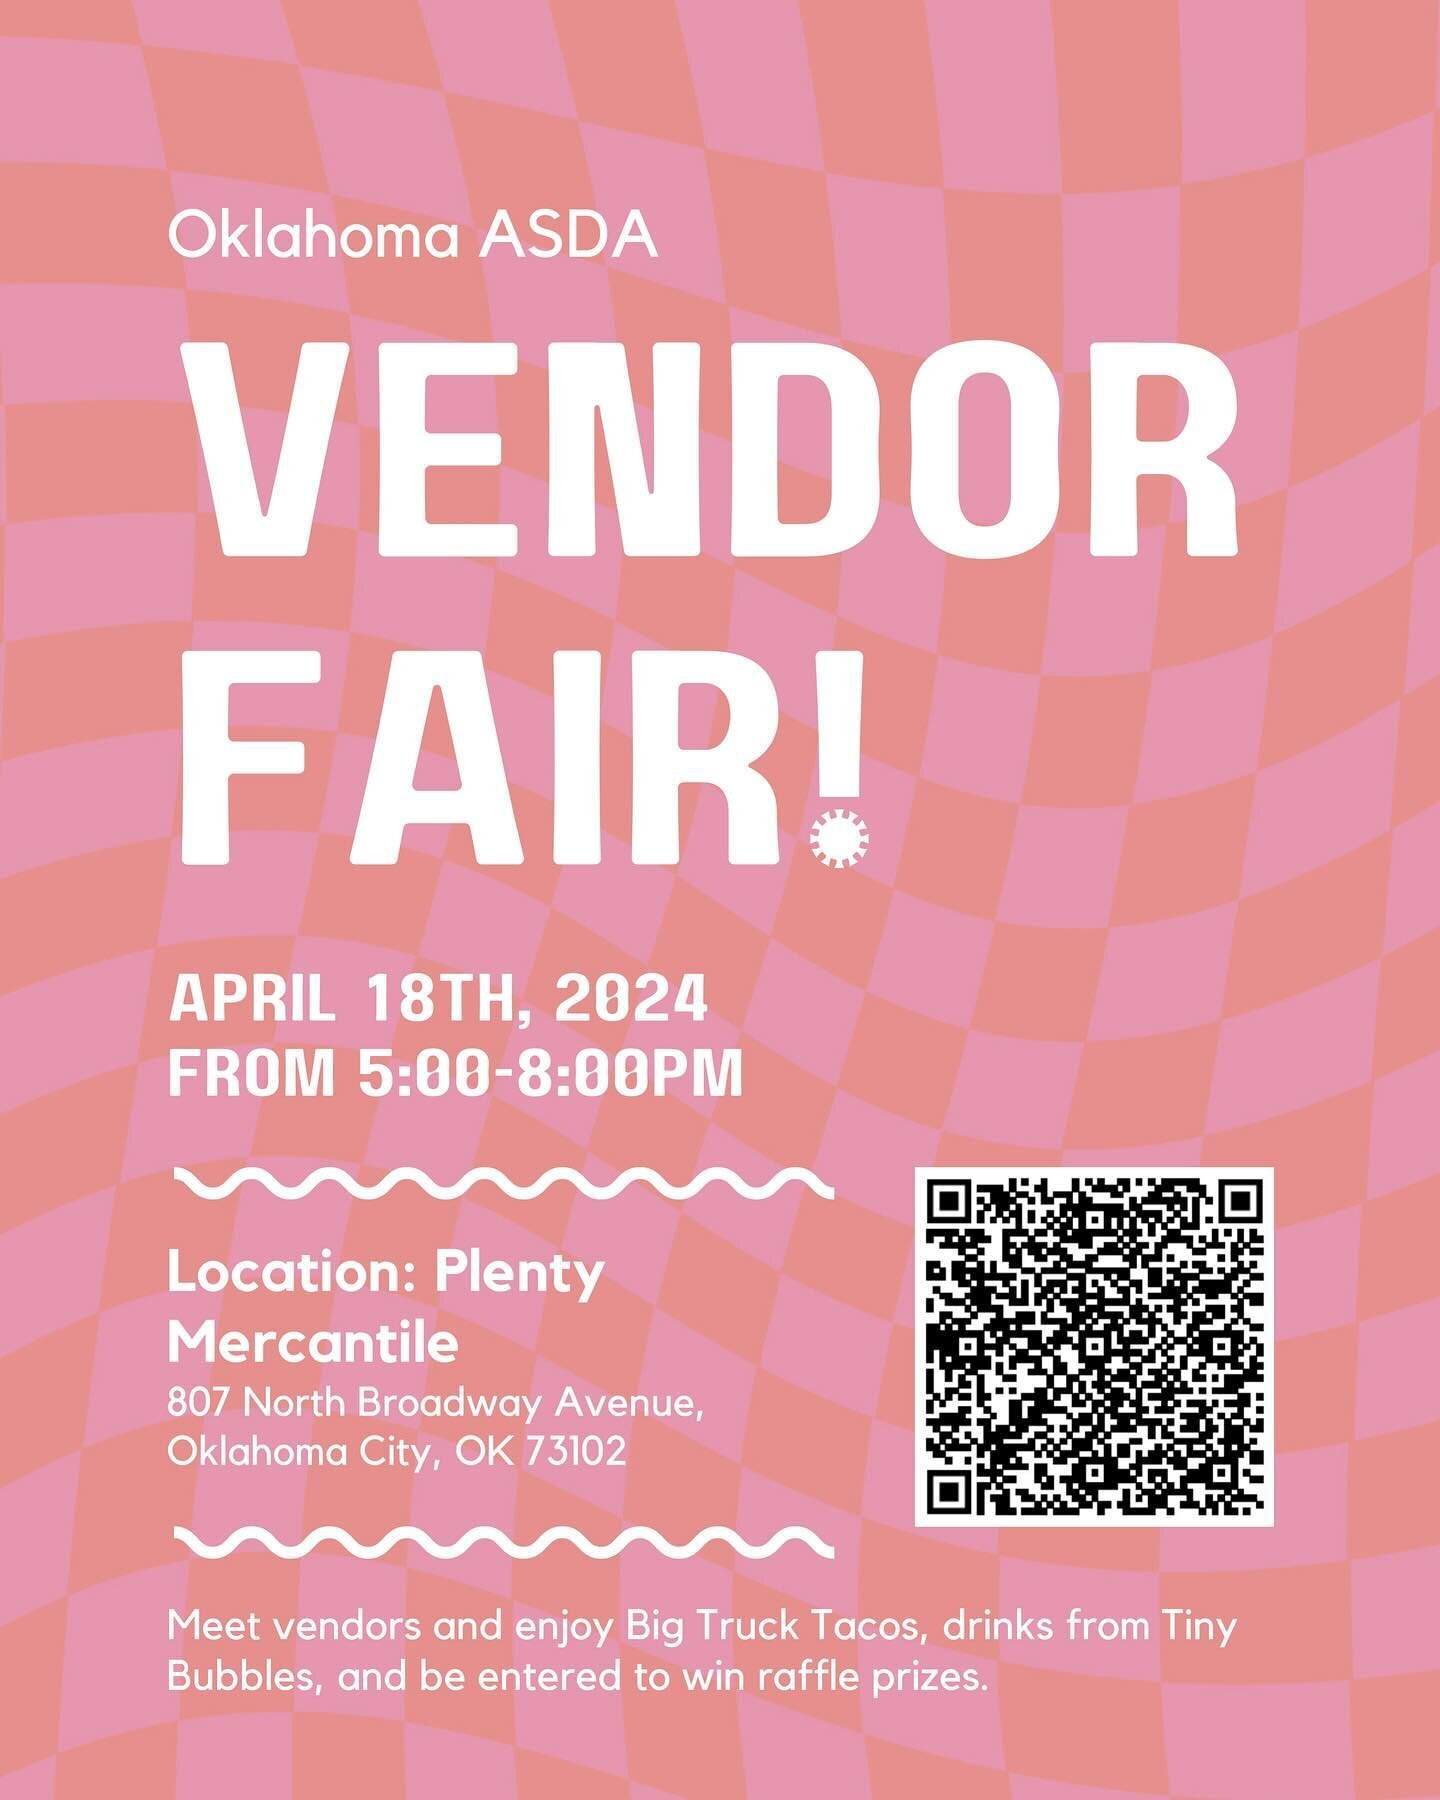 Vendor Fair April 18 🥳 Food and drinks will be provided, and there are tons of prizes to win throughout the evening 🕺🏻😋 We will see you there!!